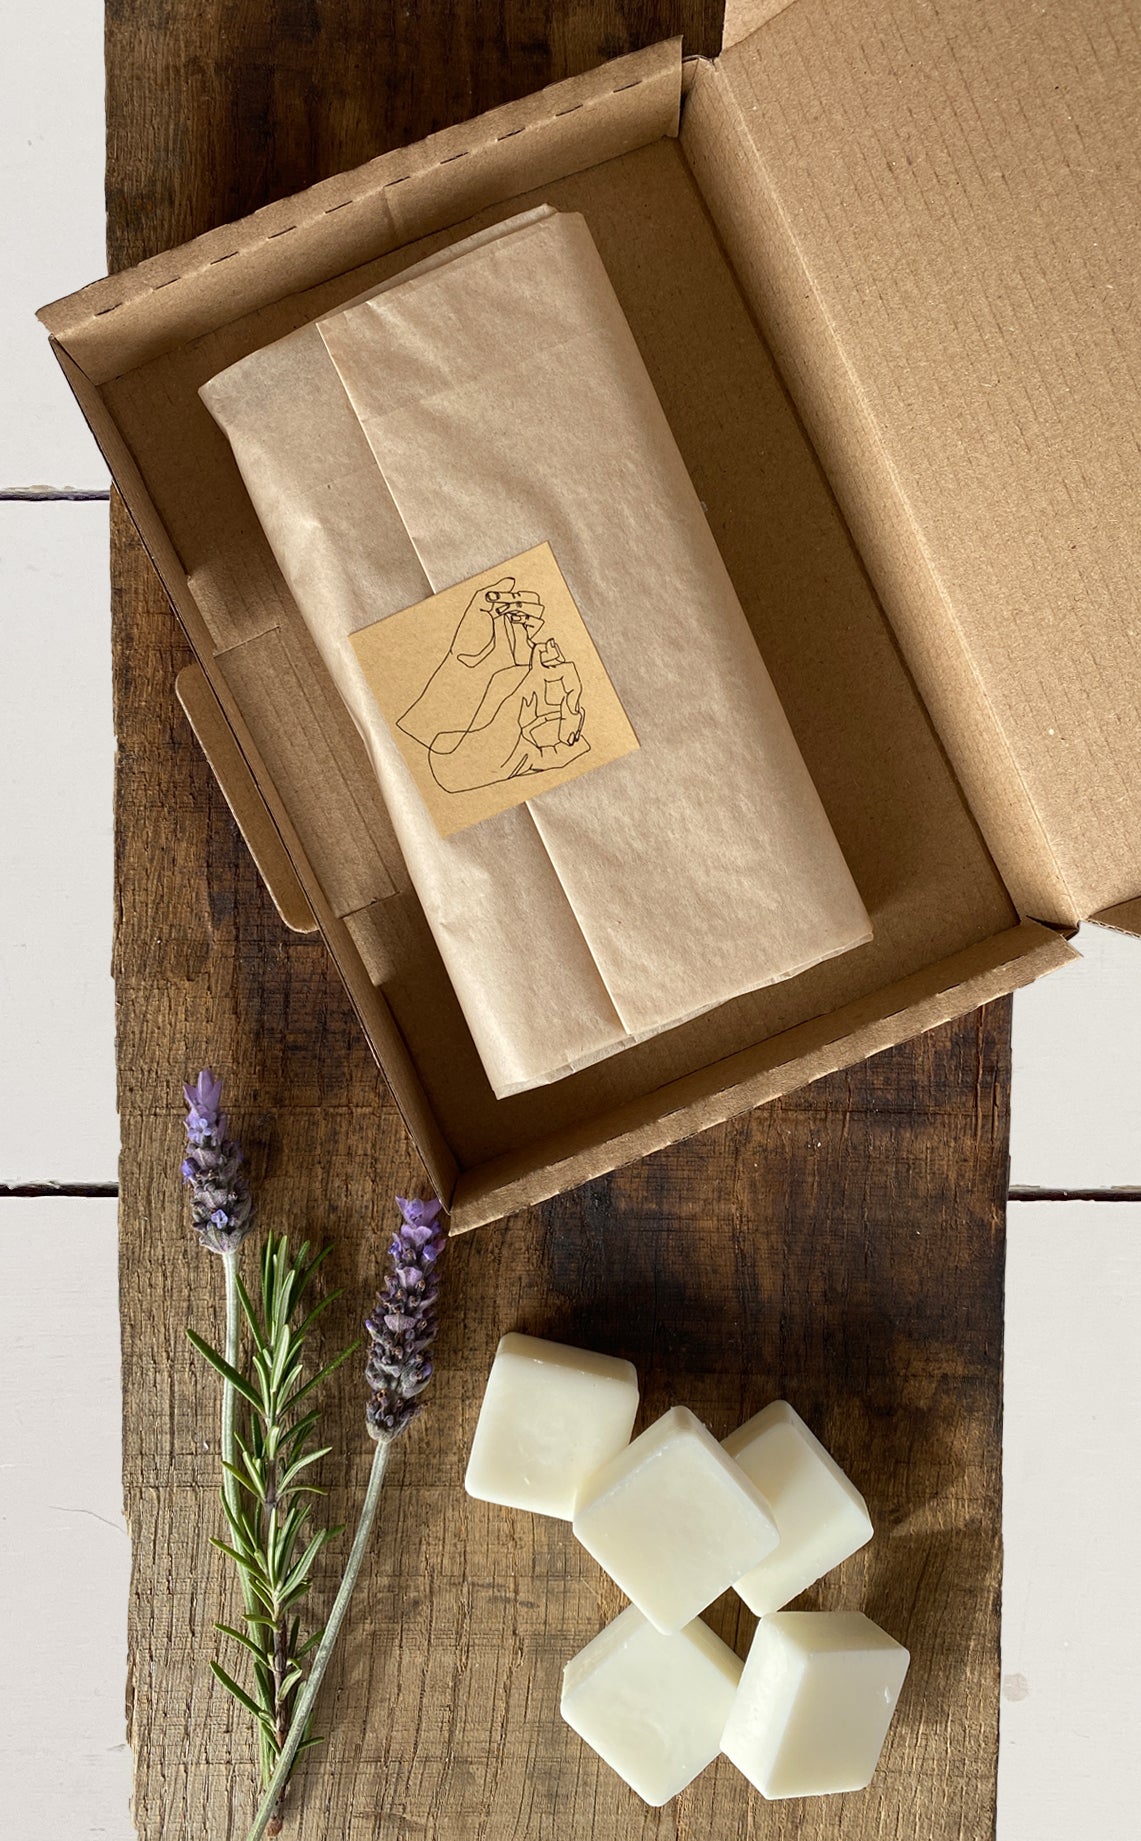 The wax melts are completely natural and packaged plastic free in tissue and a hand stamped box. Alongside them are the natural ingredients rosemary and lavender.